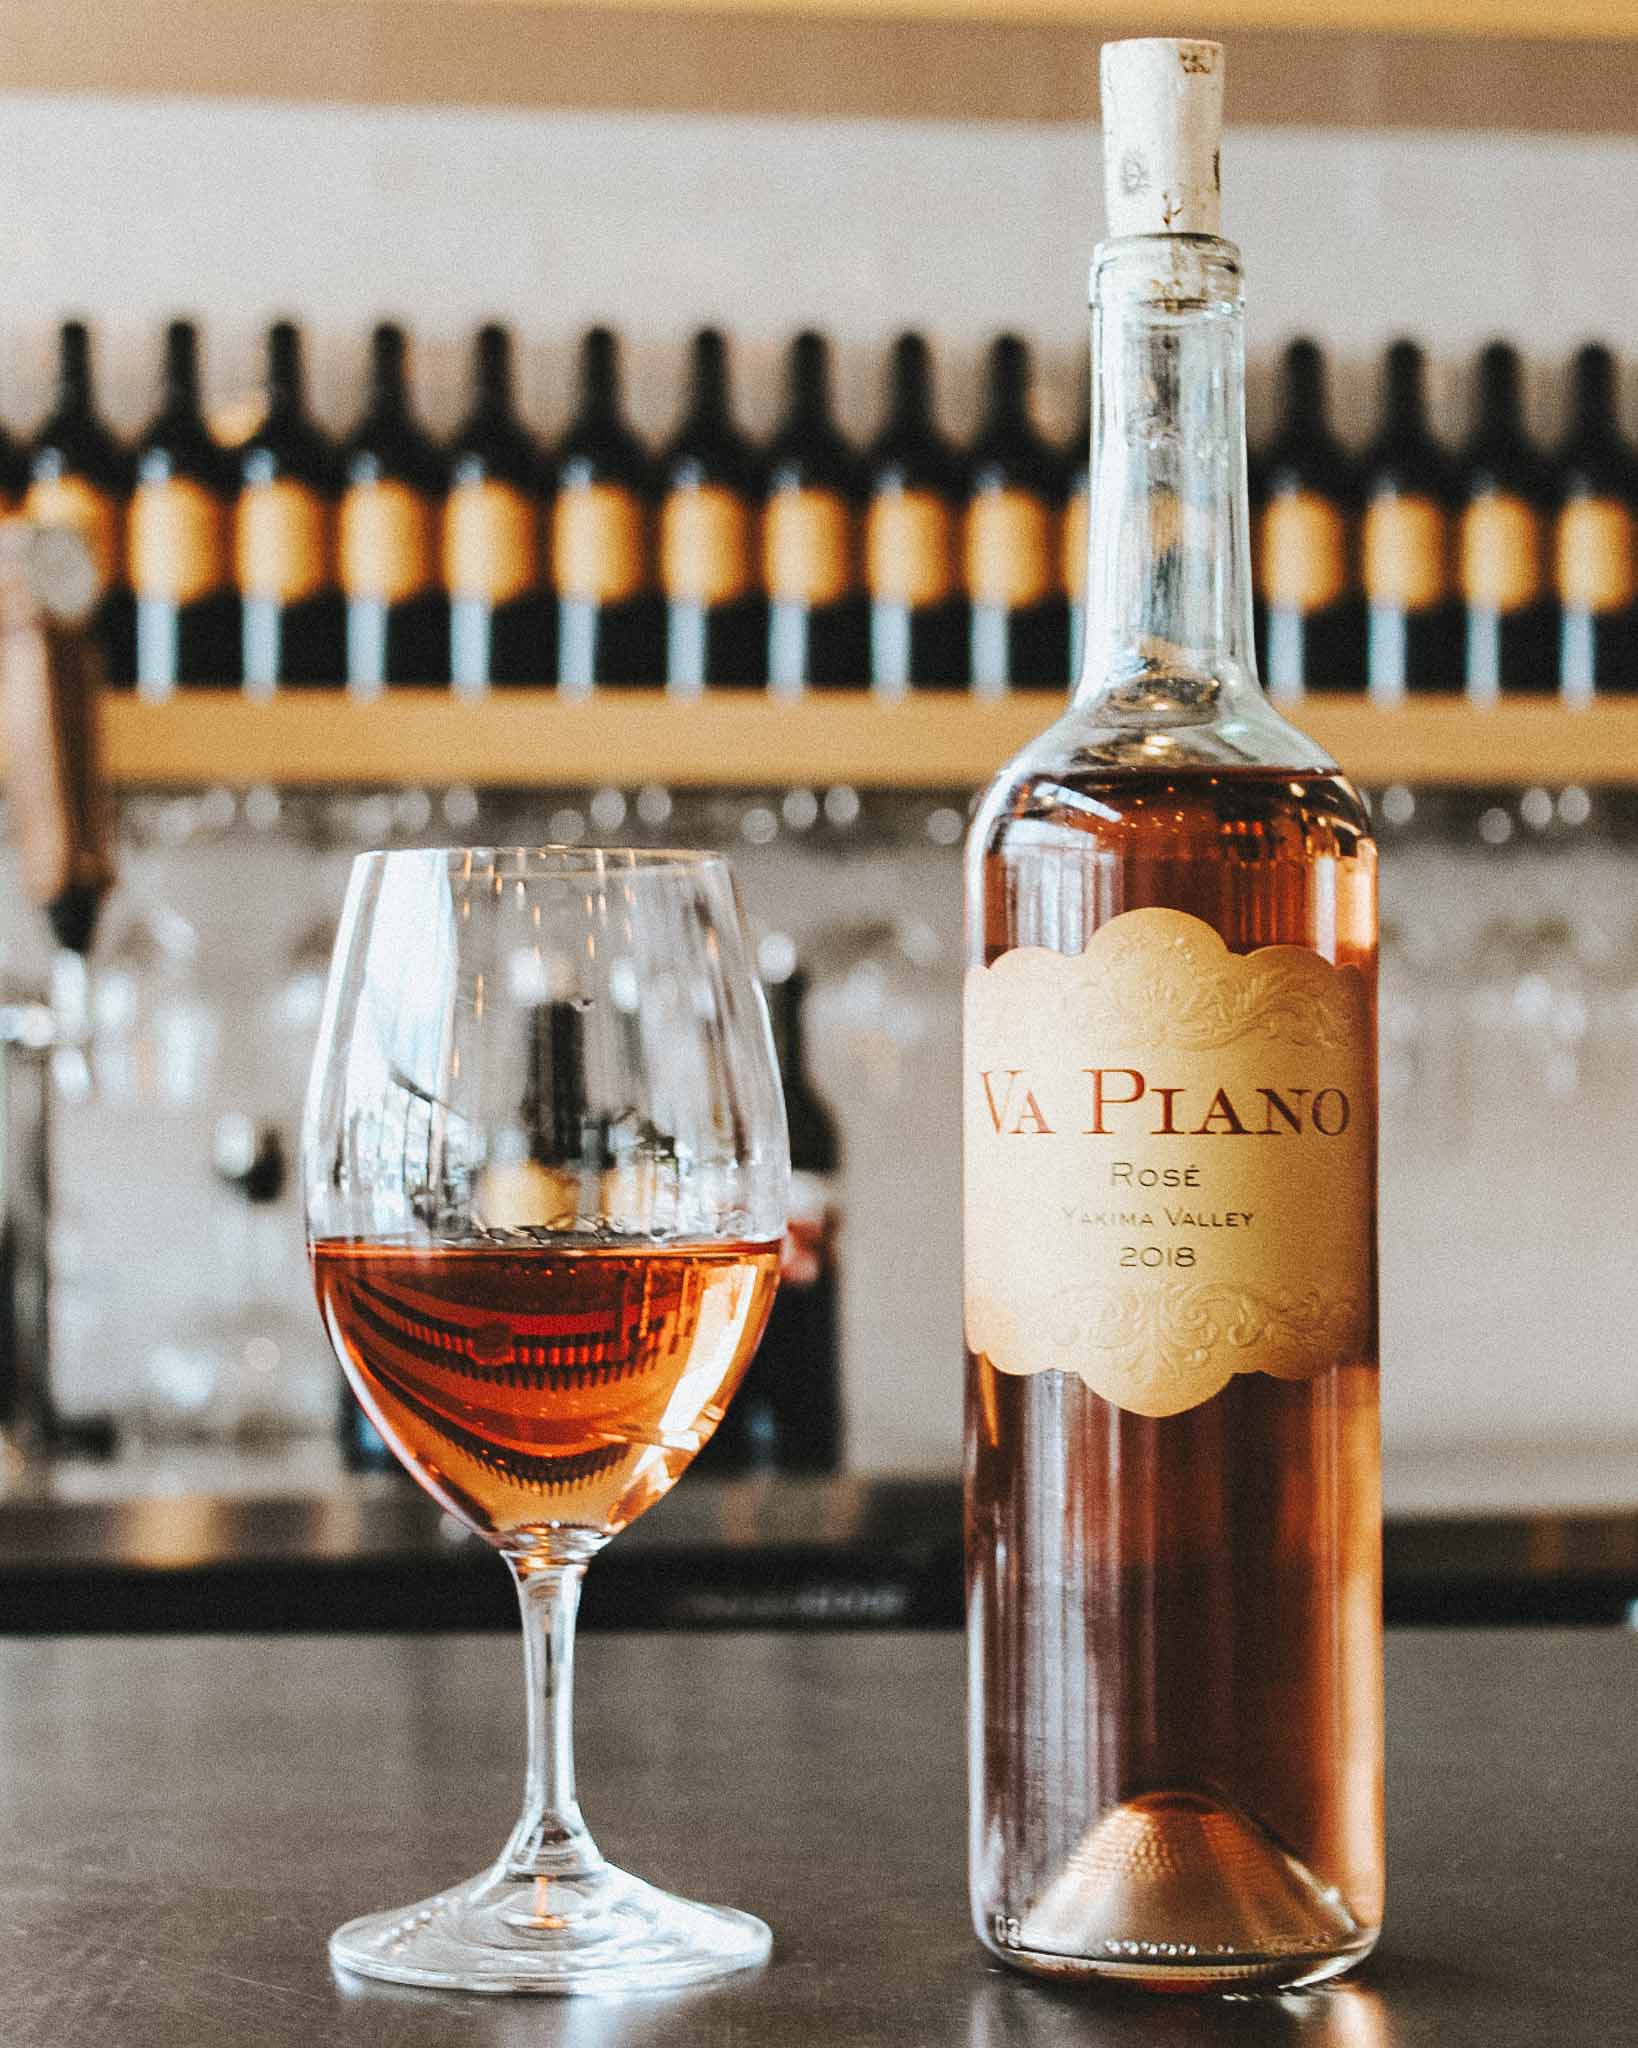 glass of rosé sits next to a bottle of va piano vineyards wine